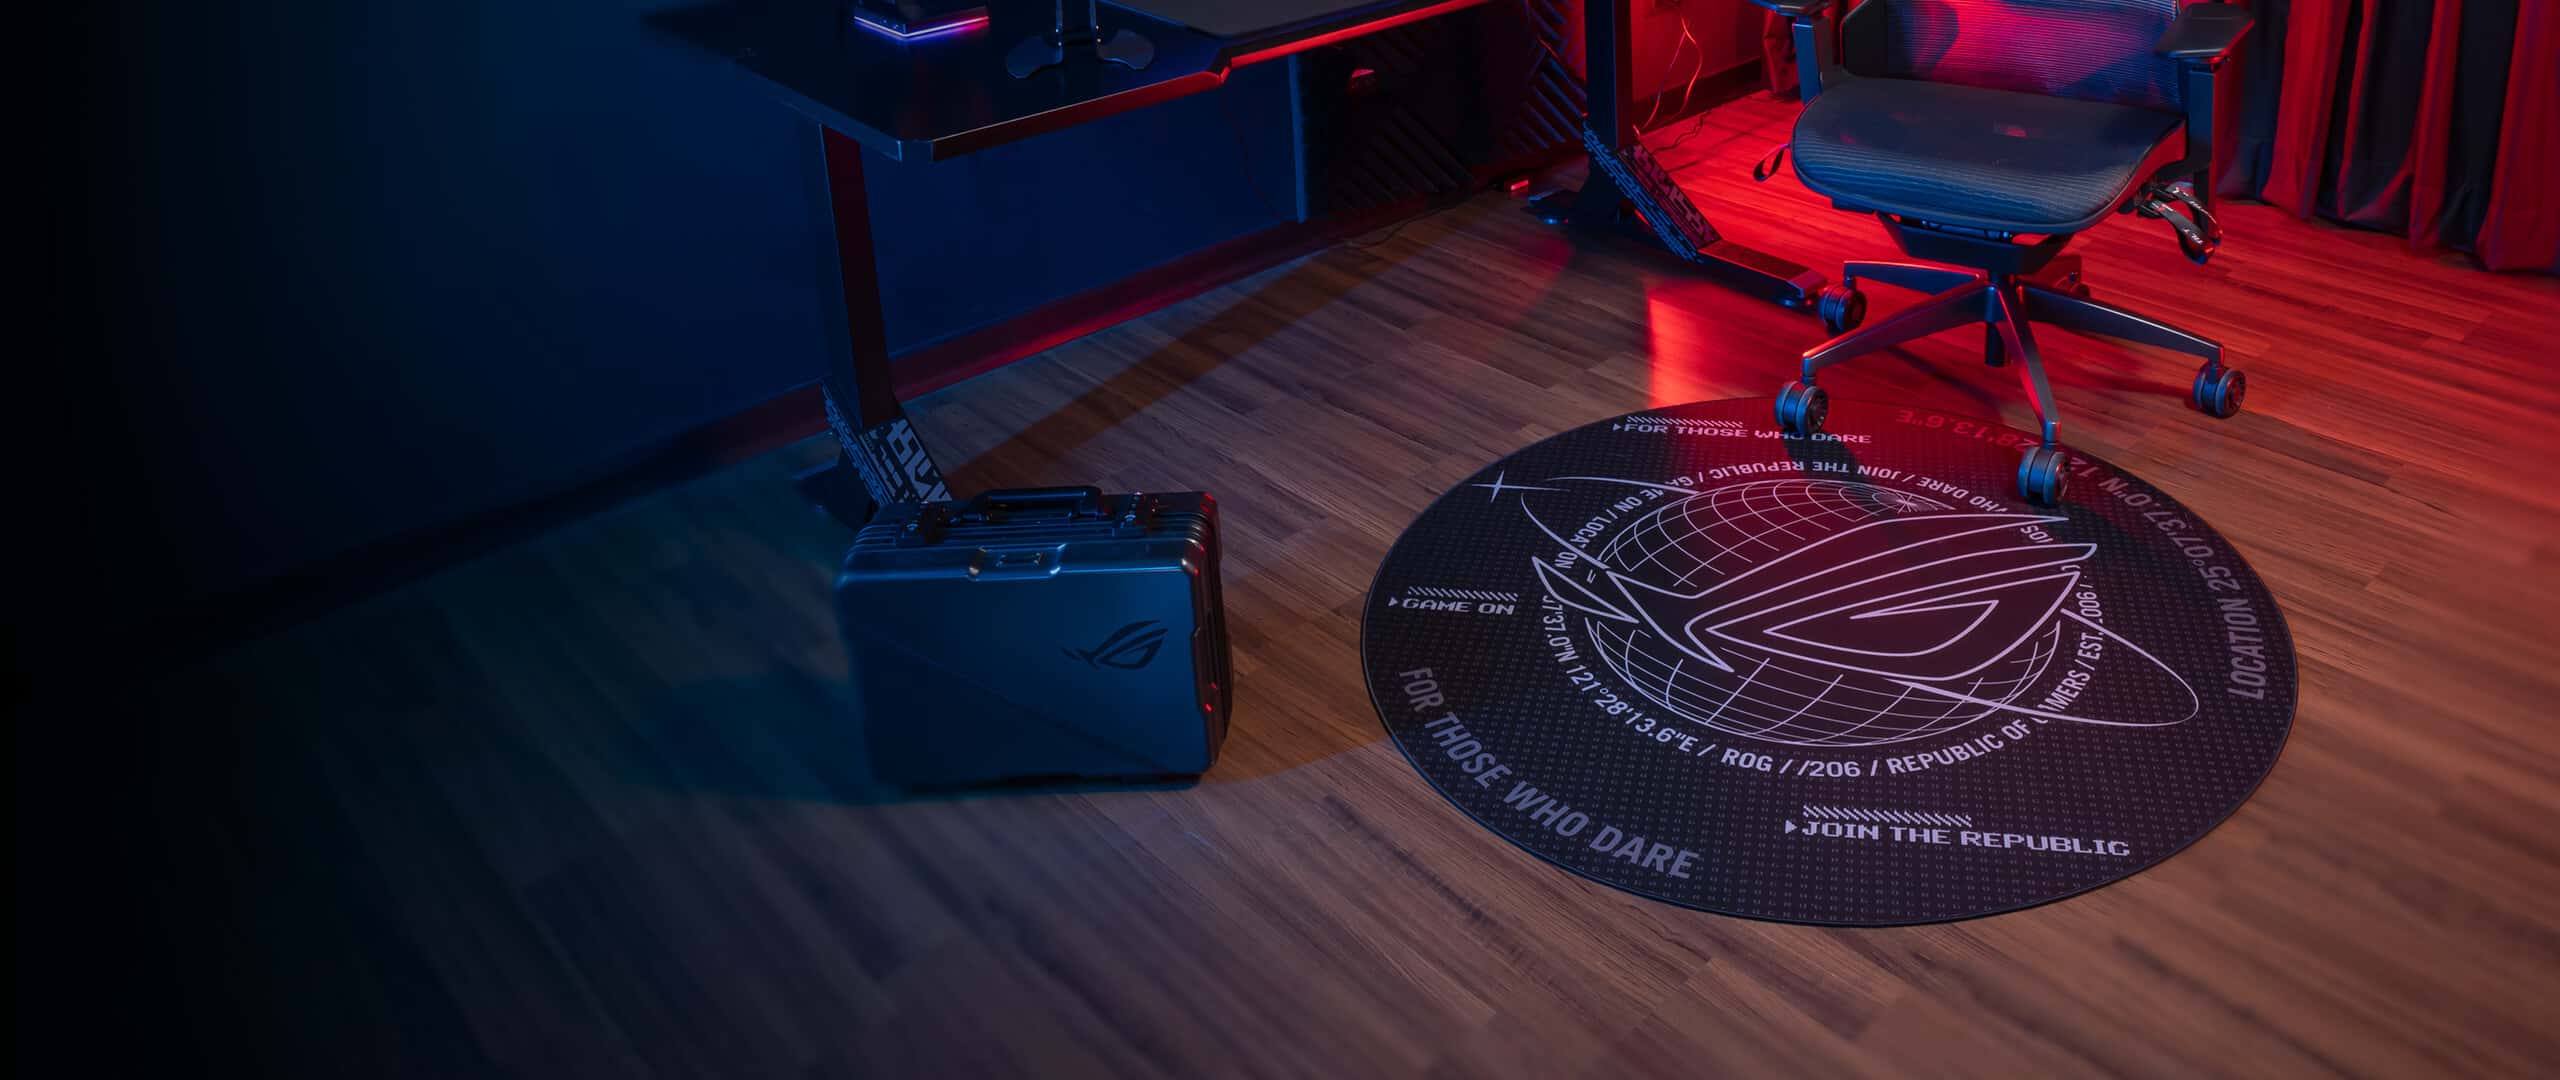 Asus ROG Cosmic Space-Themed Floor Mat Lifestyle Image 1